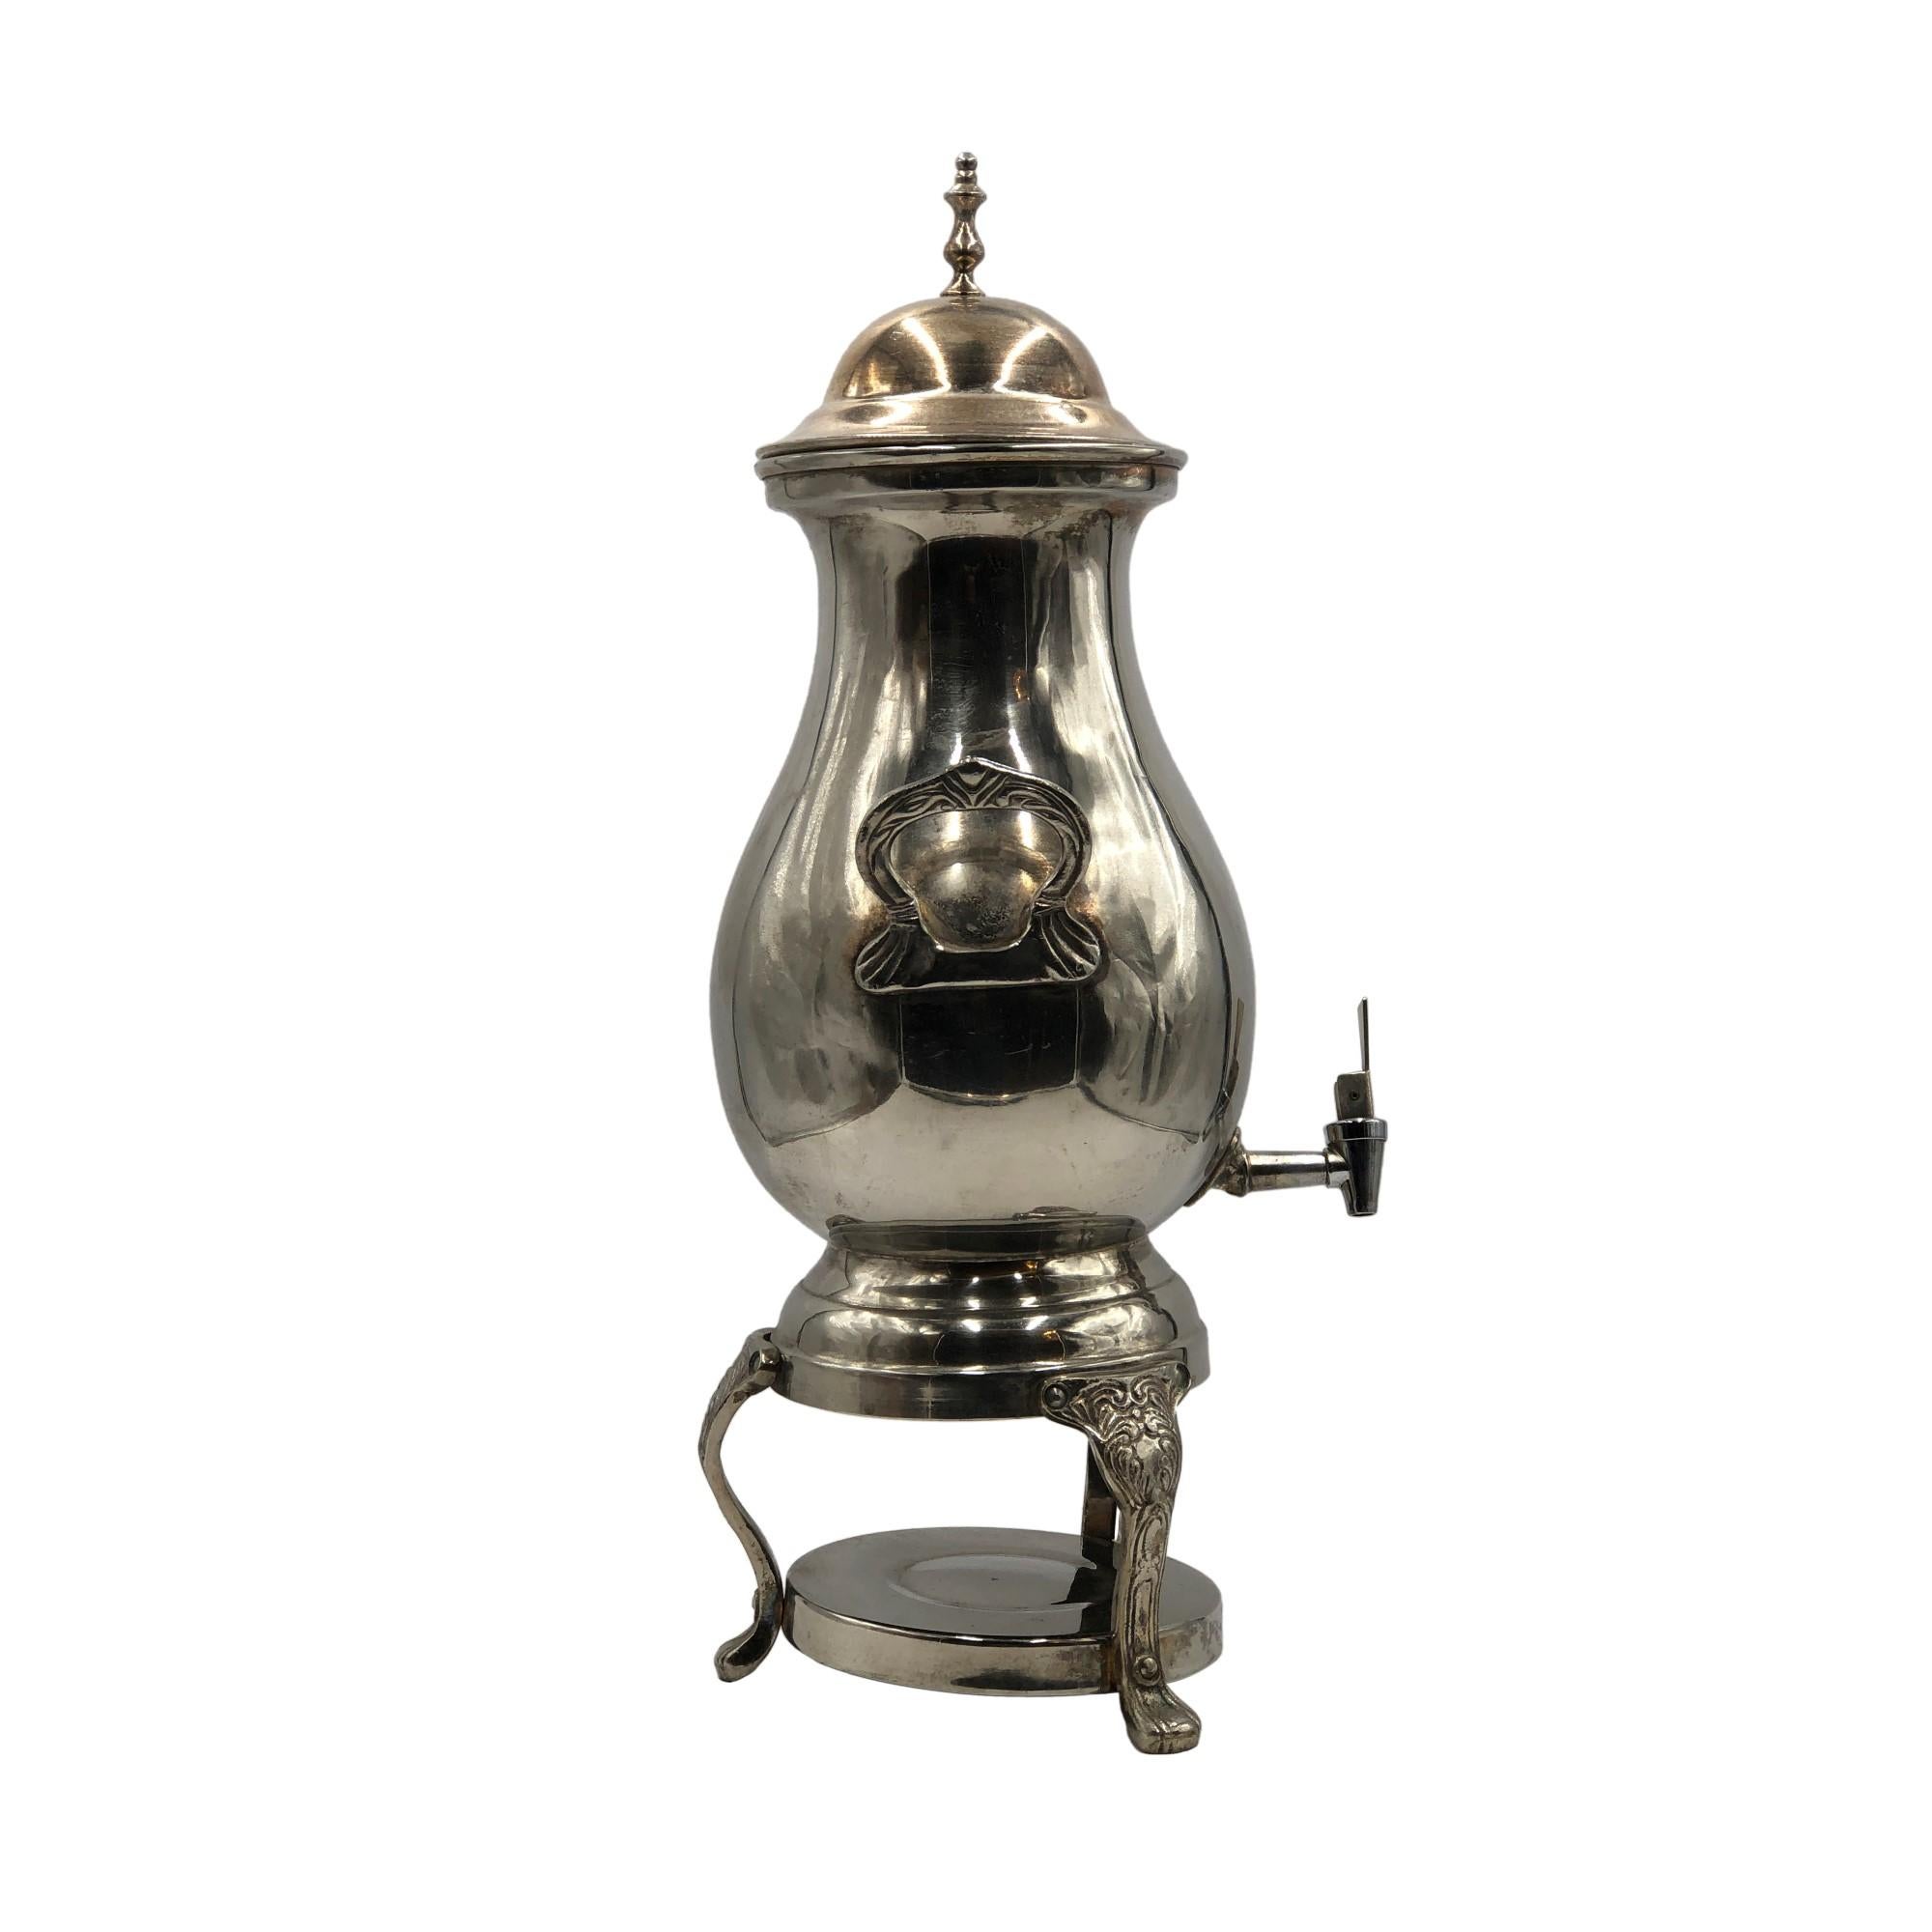 Silver plated Samovar salvaged retrieved from the Waldorf Astoria Hotel on Park Ave in NYC. Waldorf Astoria authenticity card included with your purchase. Please note, this item is located in one of our NYC locations.